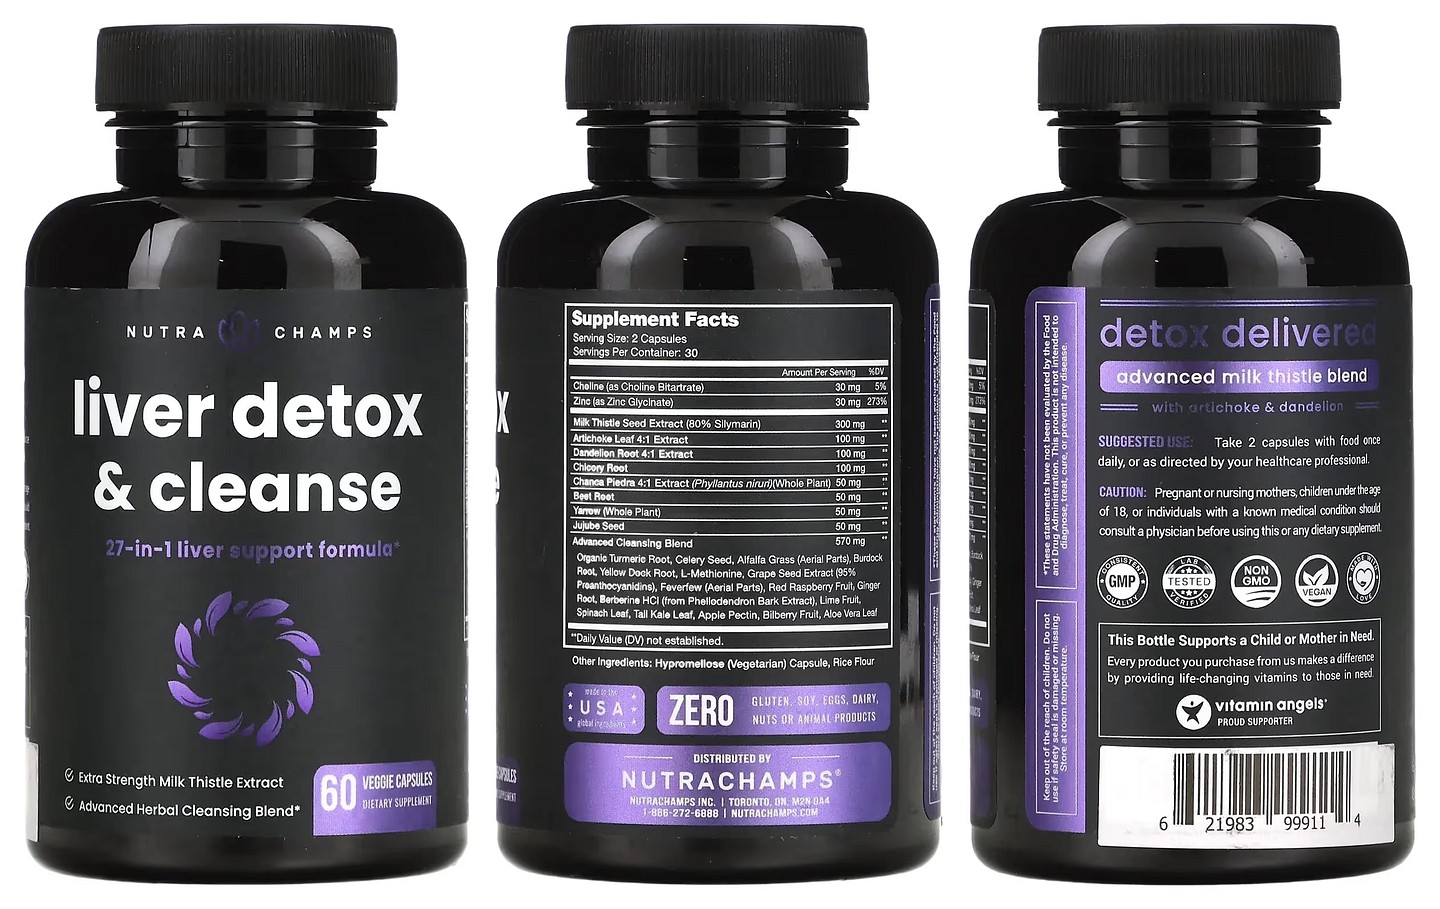 NutraChamps, Liver Detox & Cleanse packaging